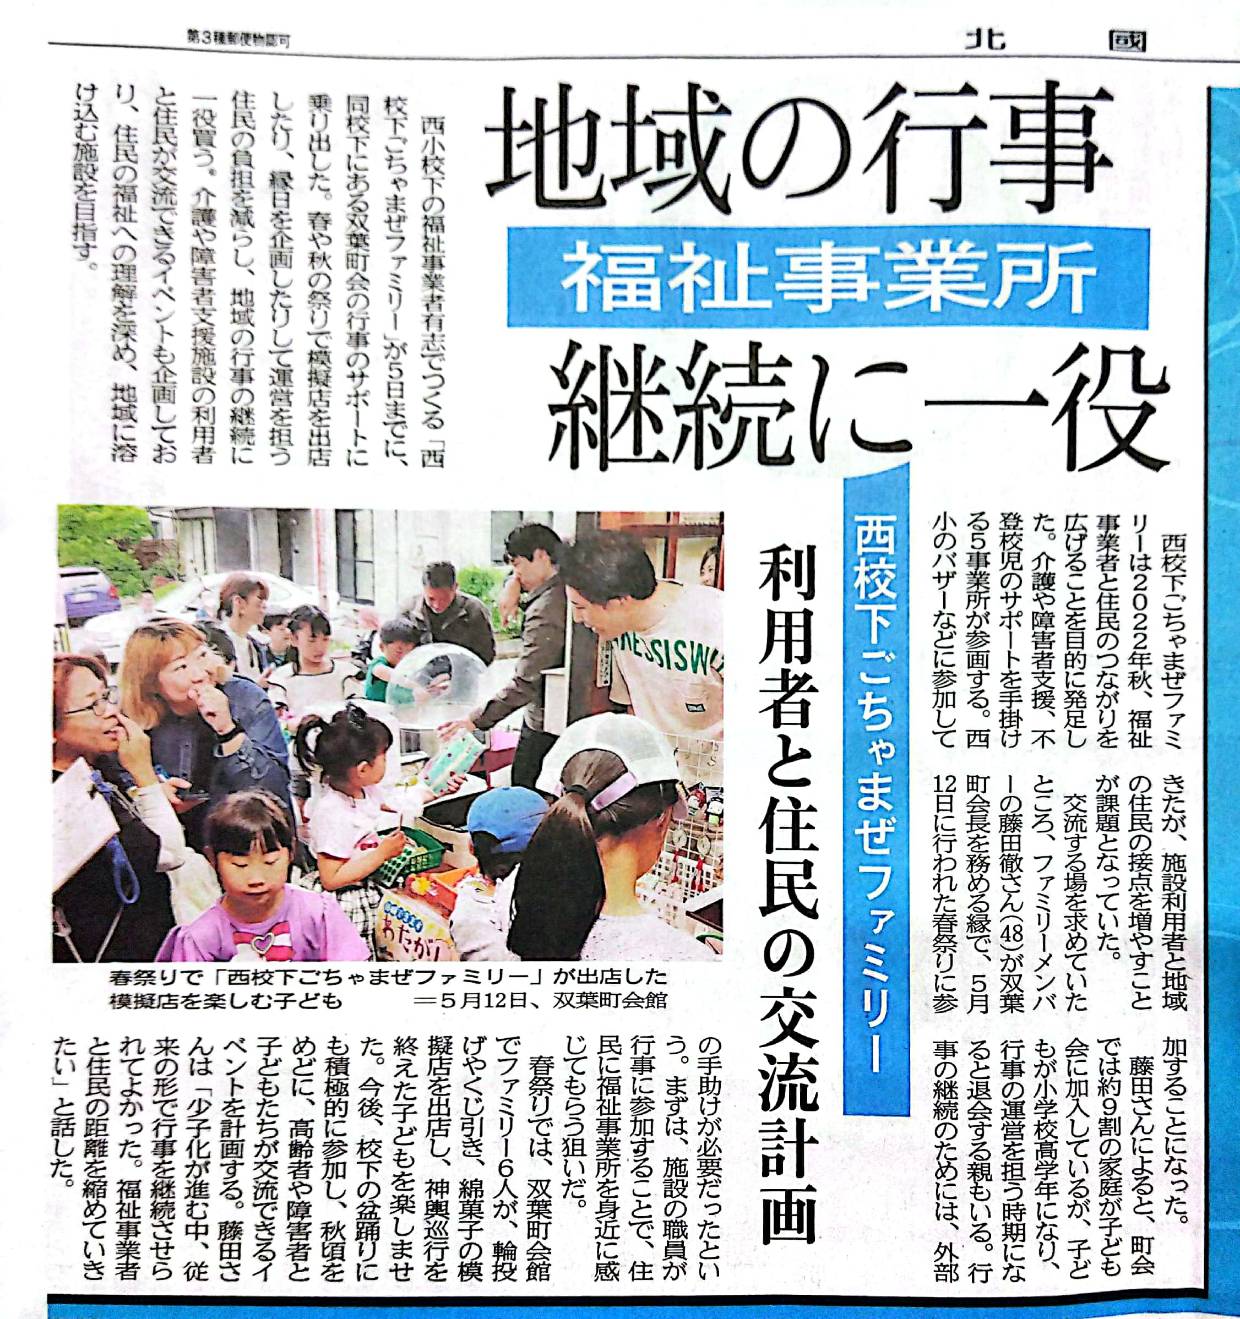 Read more about the article 【北國新聞】記事が掲載されました。双葉町春祭り「西校下ごちゃまぜファミリー」参加支援